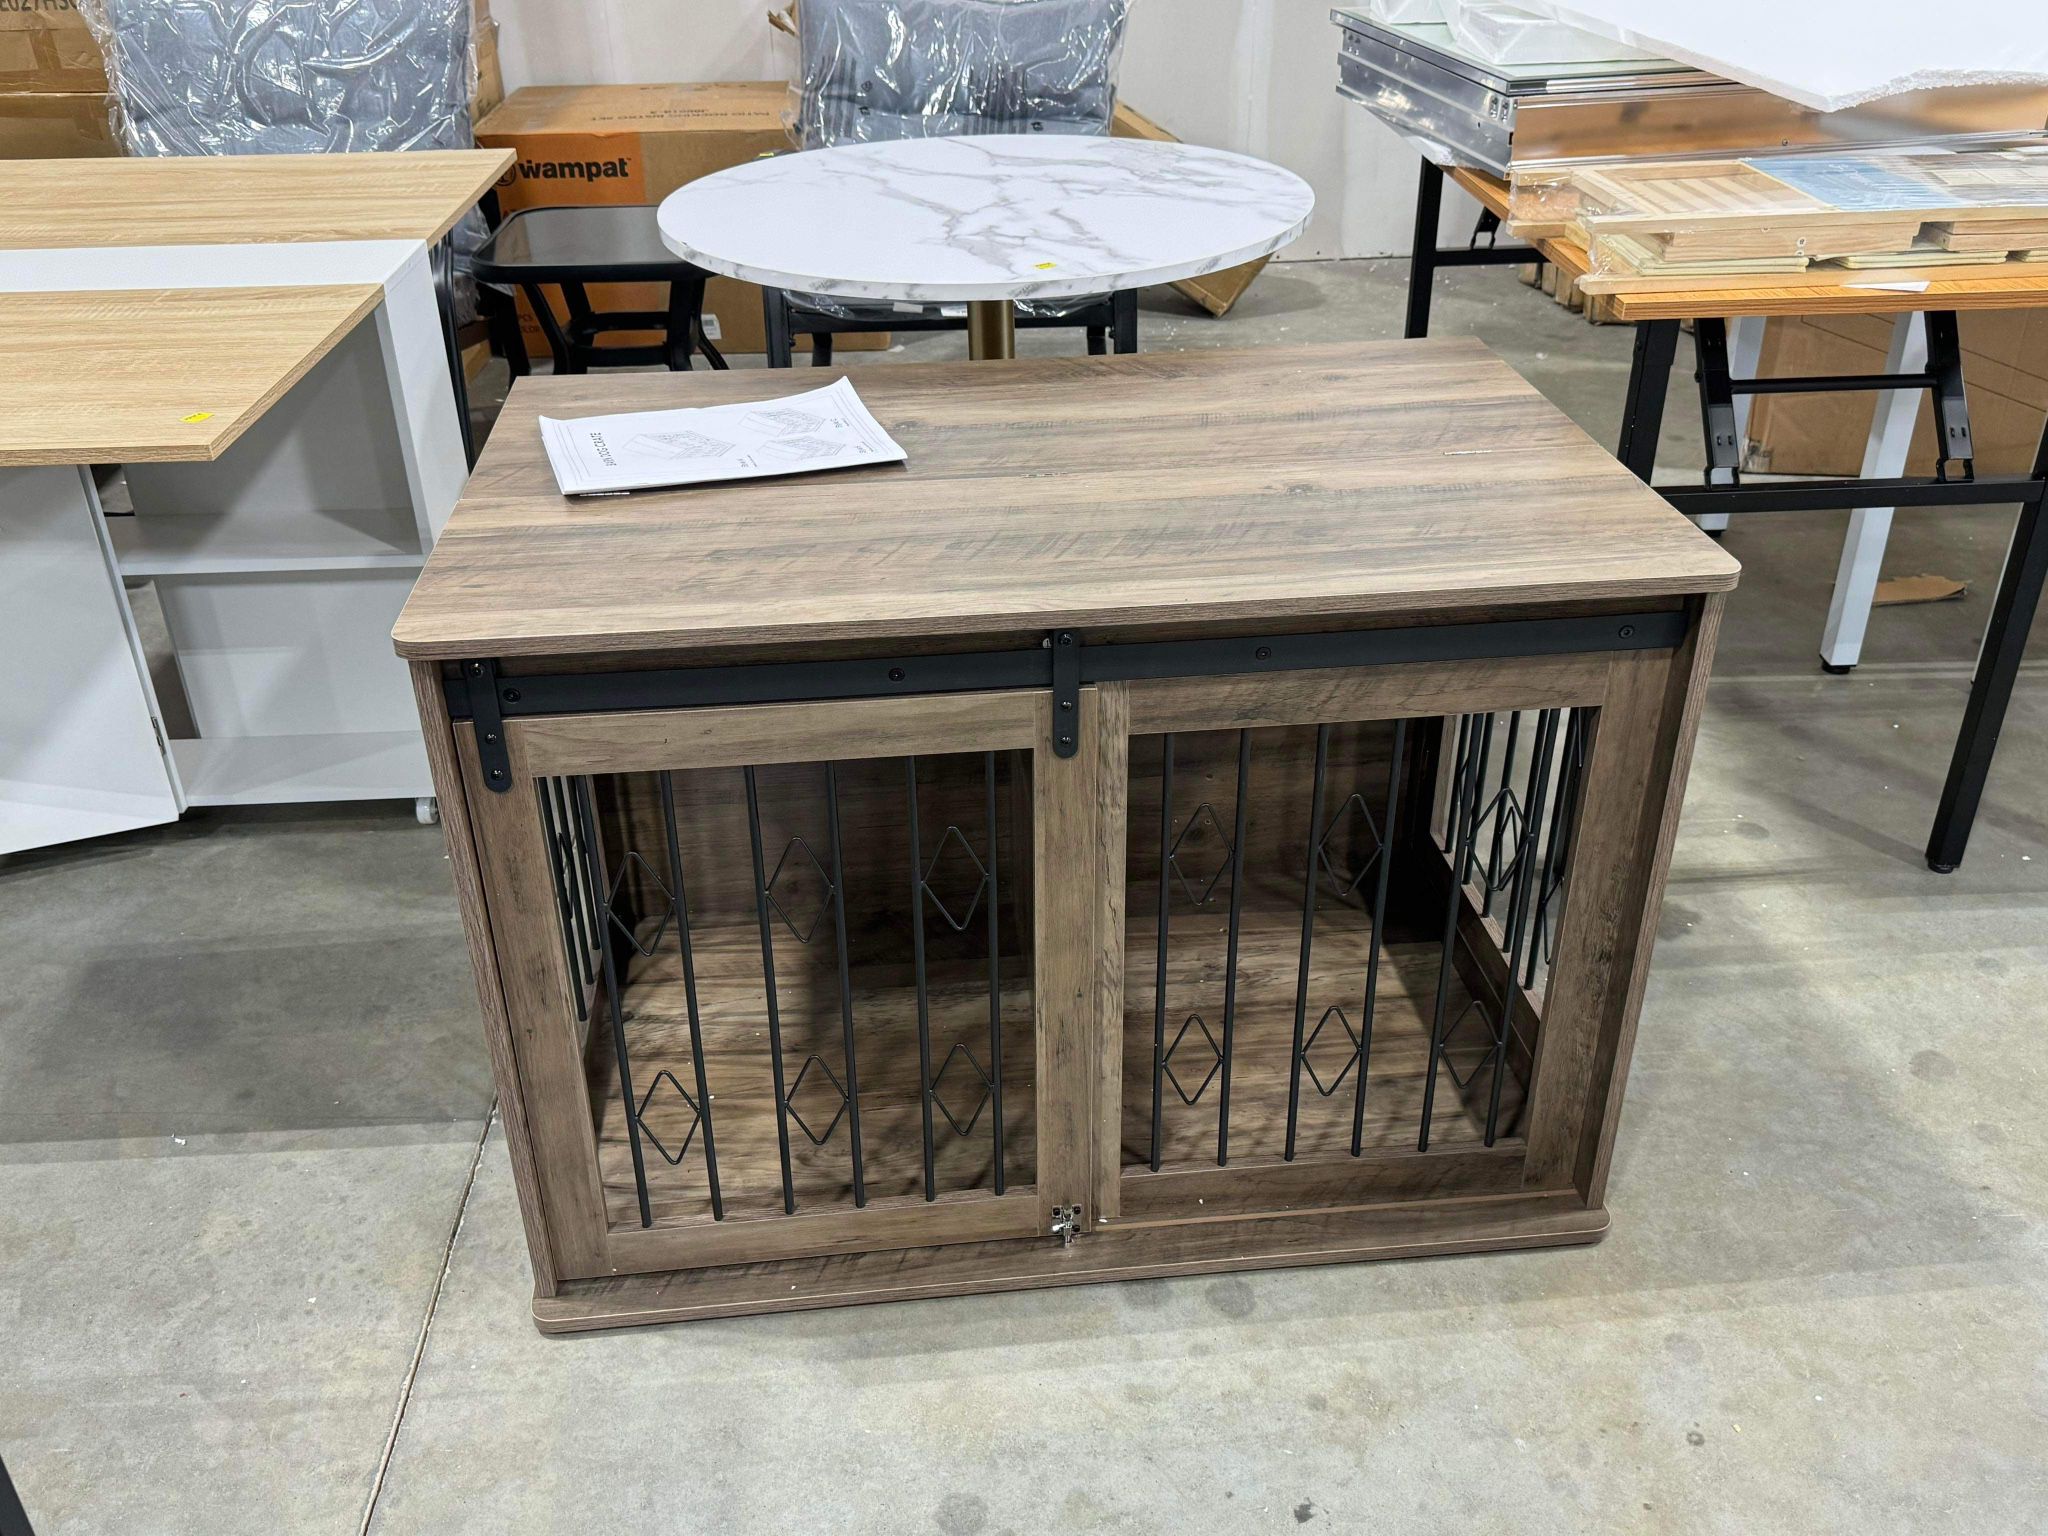 Large Dog Crate Furniture w/Sliding Barn Door, Wooden Indoor Dog Kennel w/Flip-top, 39.4'' Heavy Duty Modern Puppy Dog Cage End Table w/Detachable Div